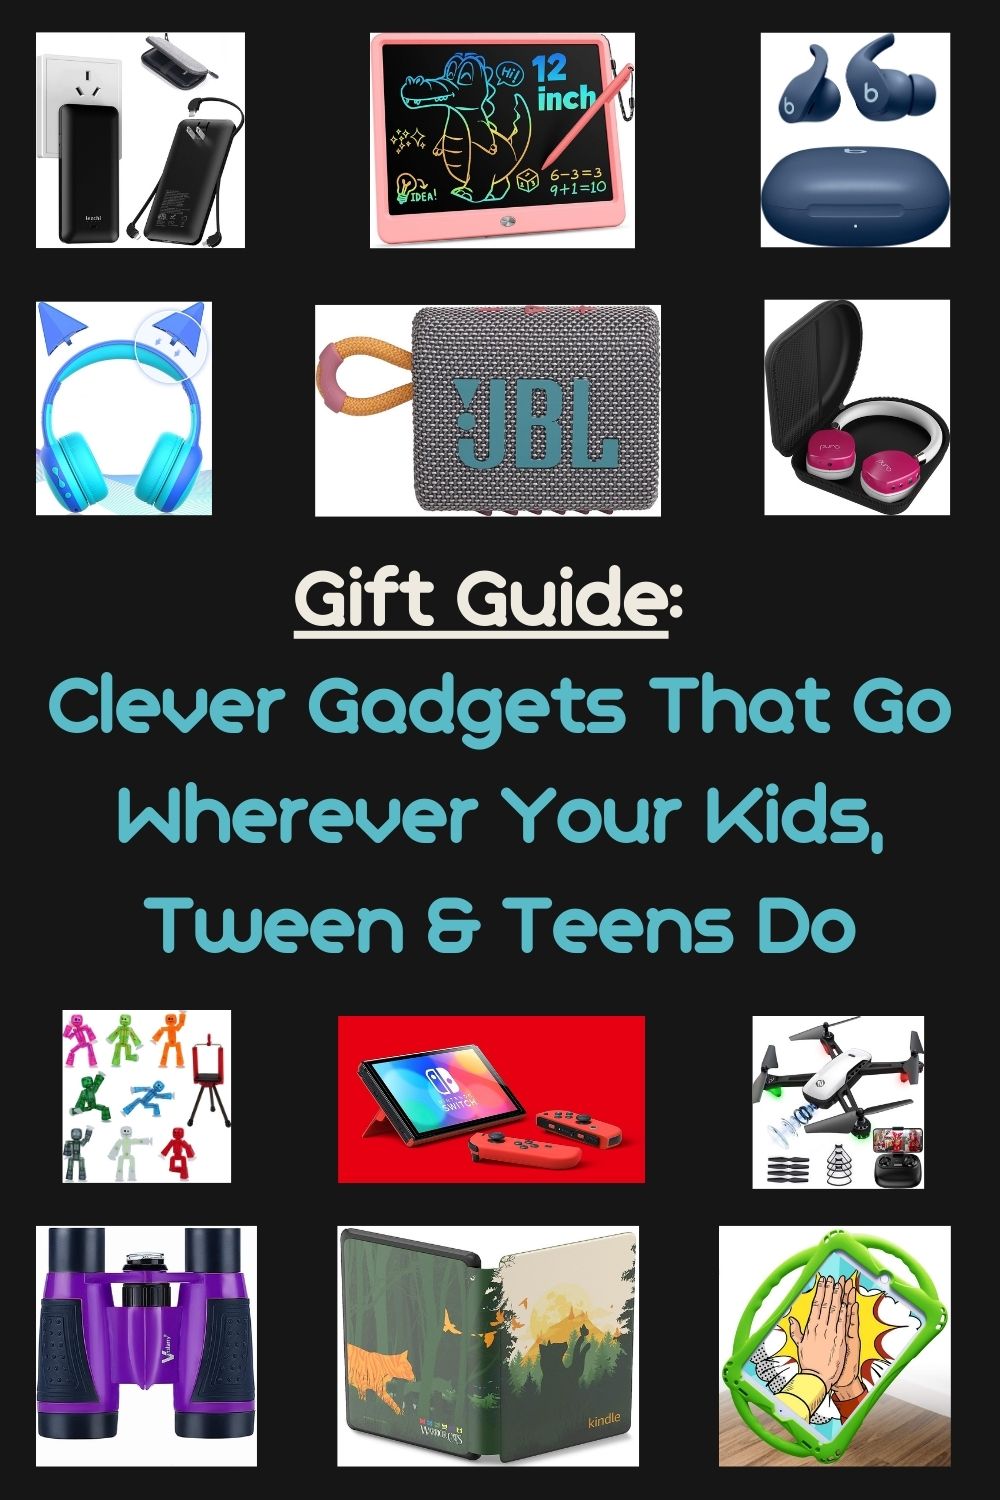 16 of the best tech gifts for teens, tweens, kids and even preschoolers. these gadgets go wherever they do and will get them creating, reading & going outdoors.